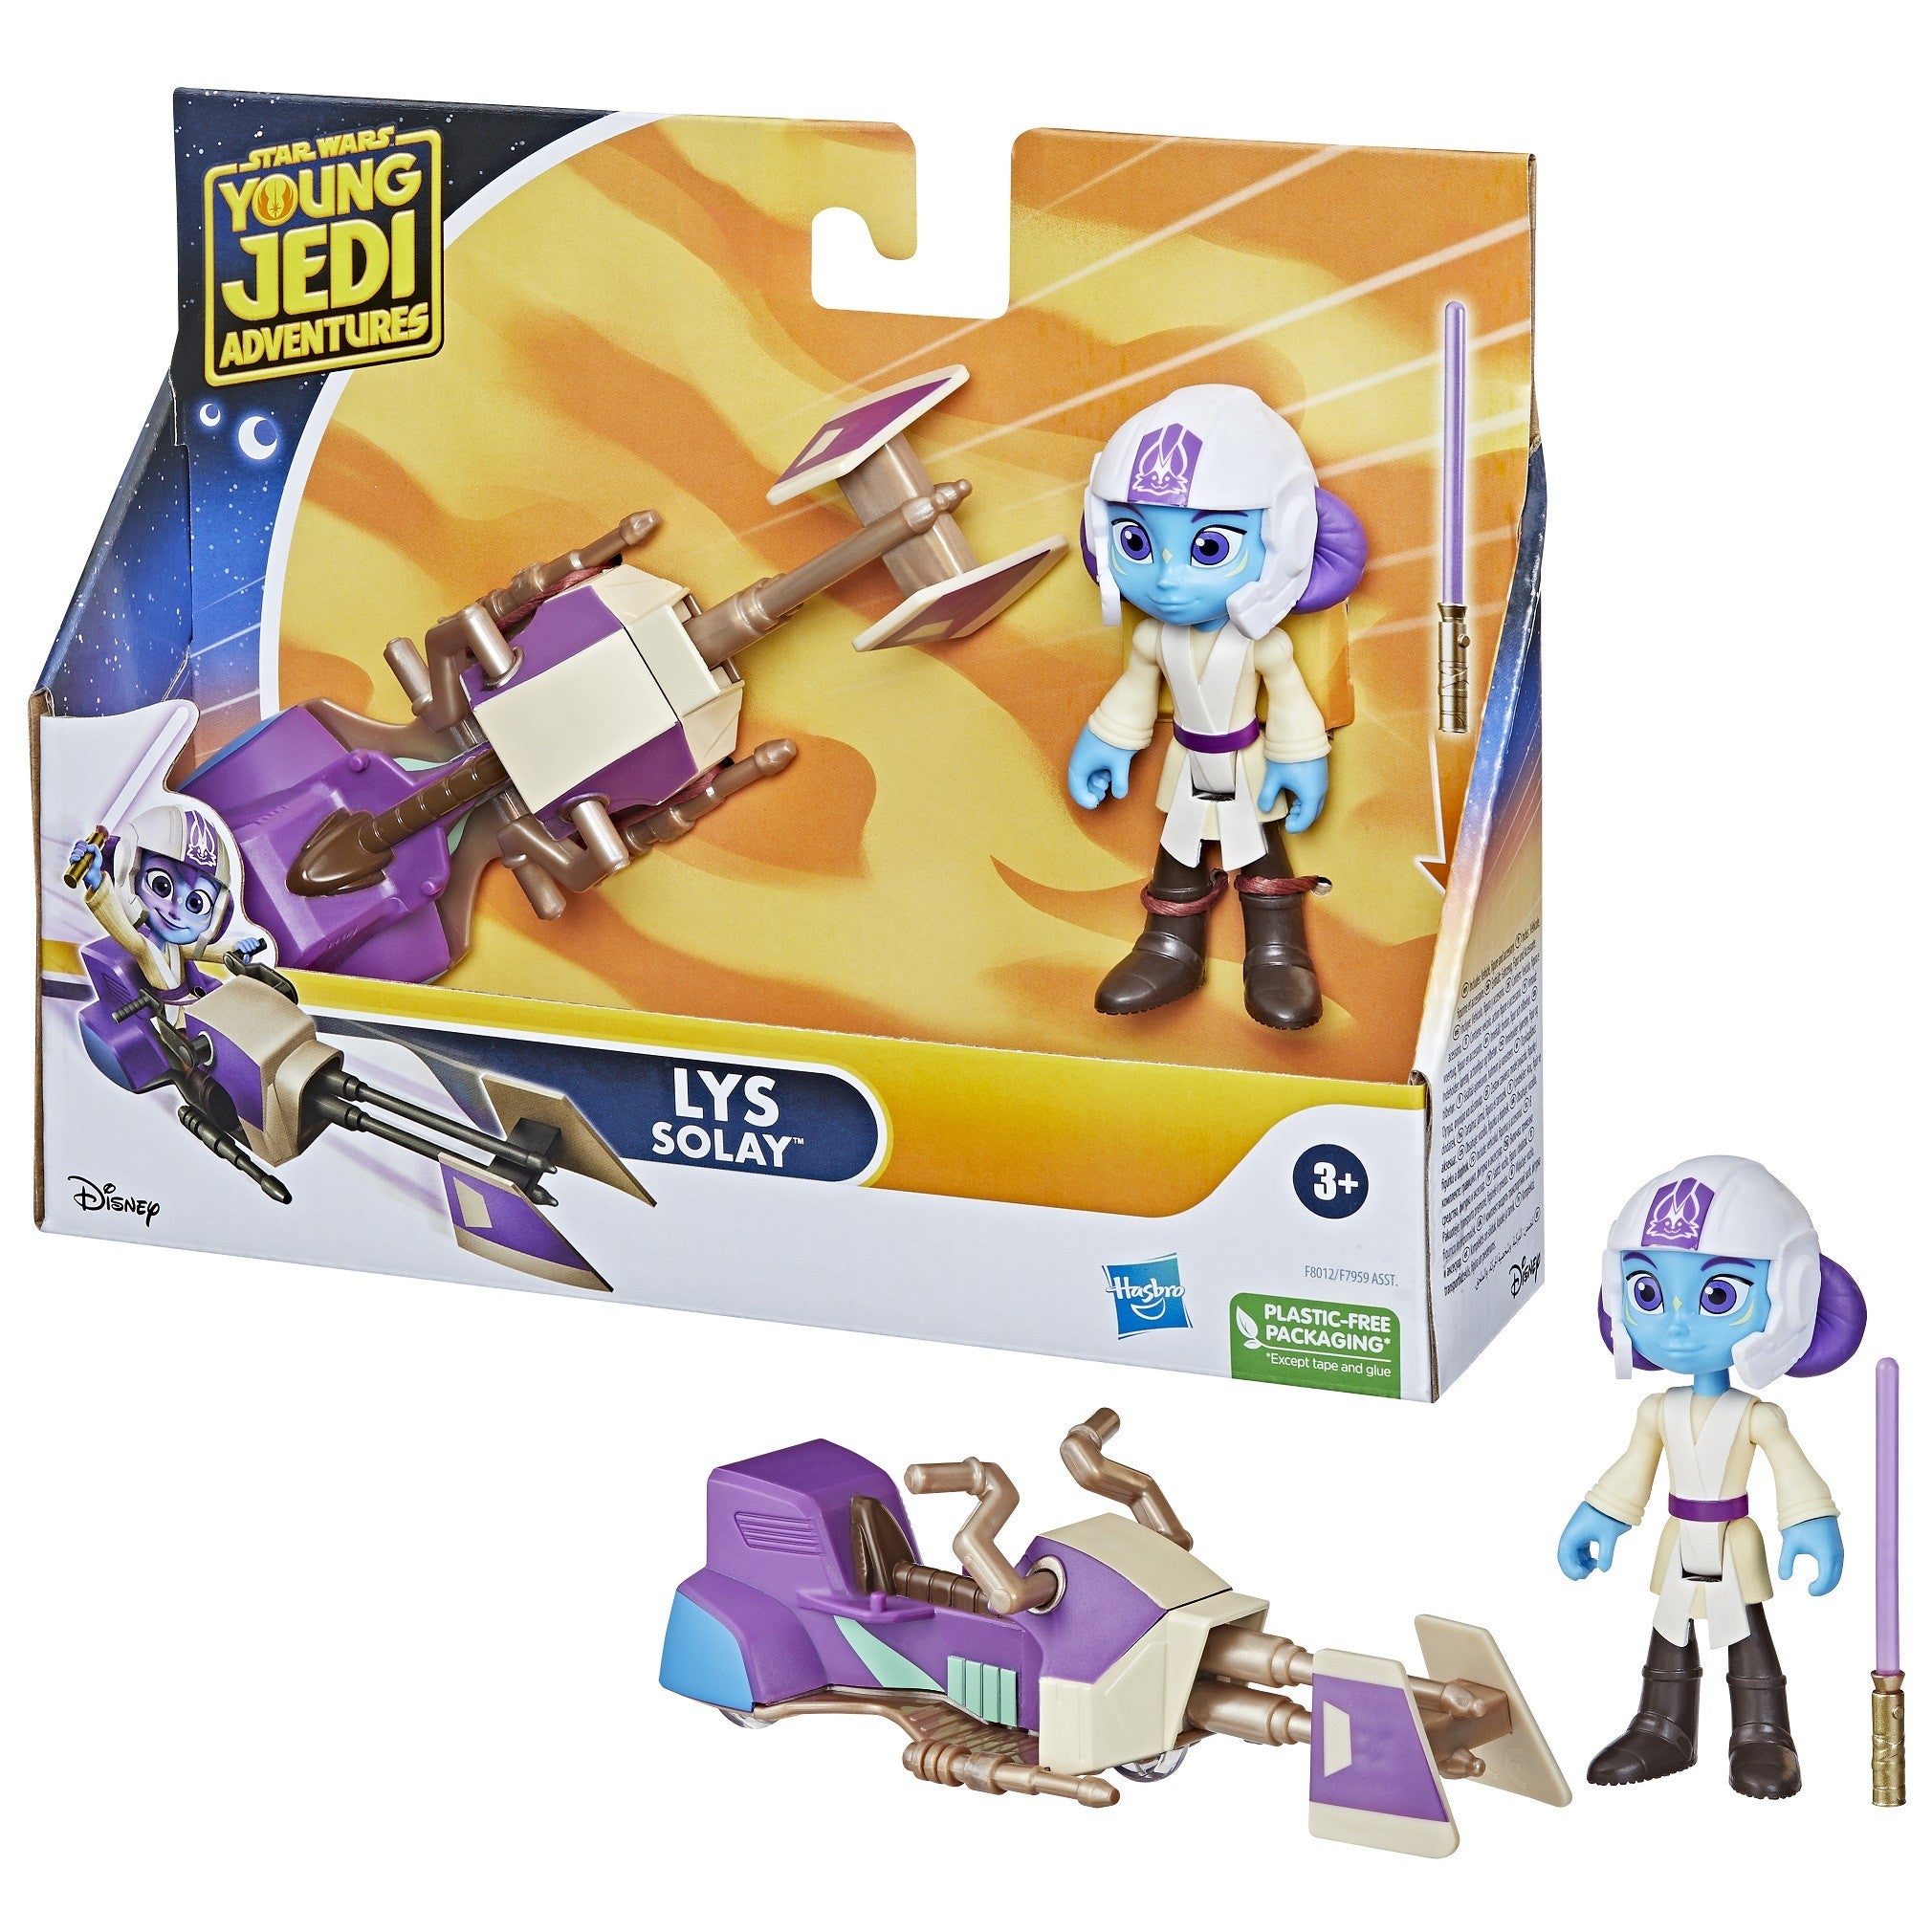 Young Jedi Adventures Lys Solay Figure & Vehicle